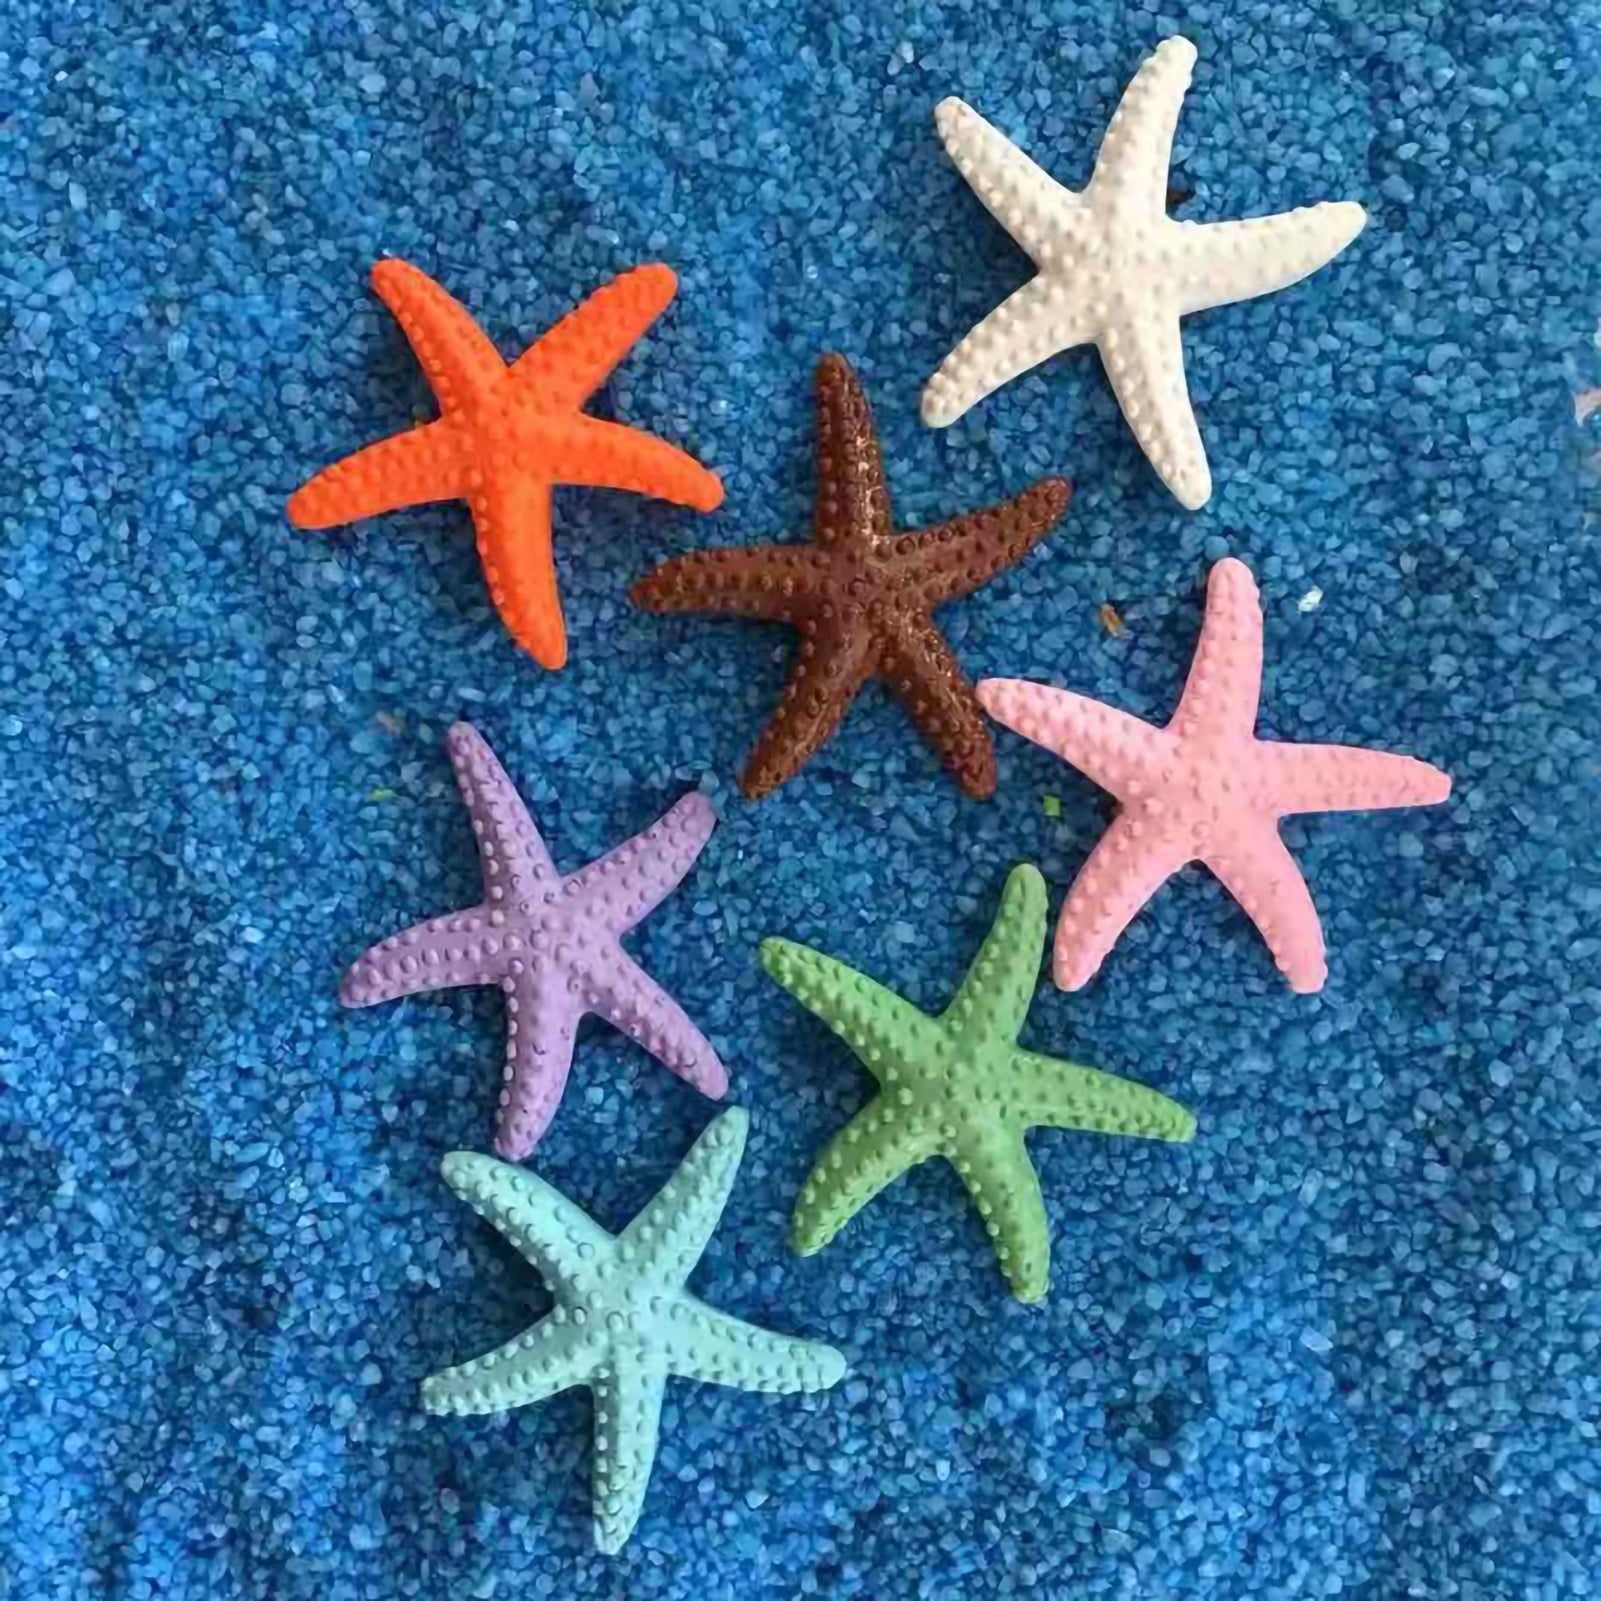 5 pc Artificial Starfish Assorted